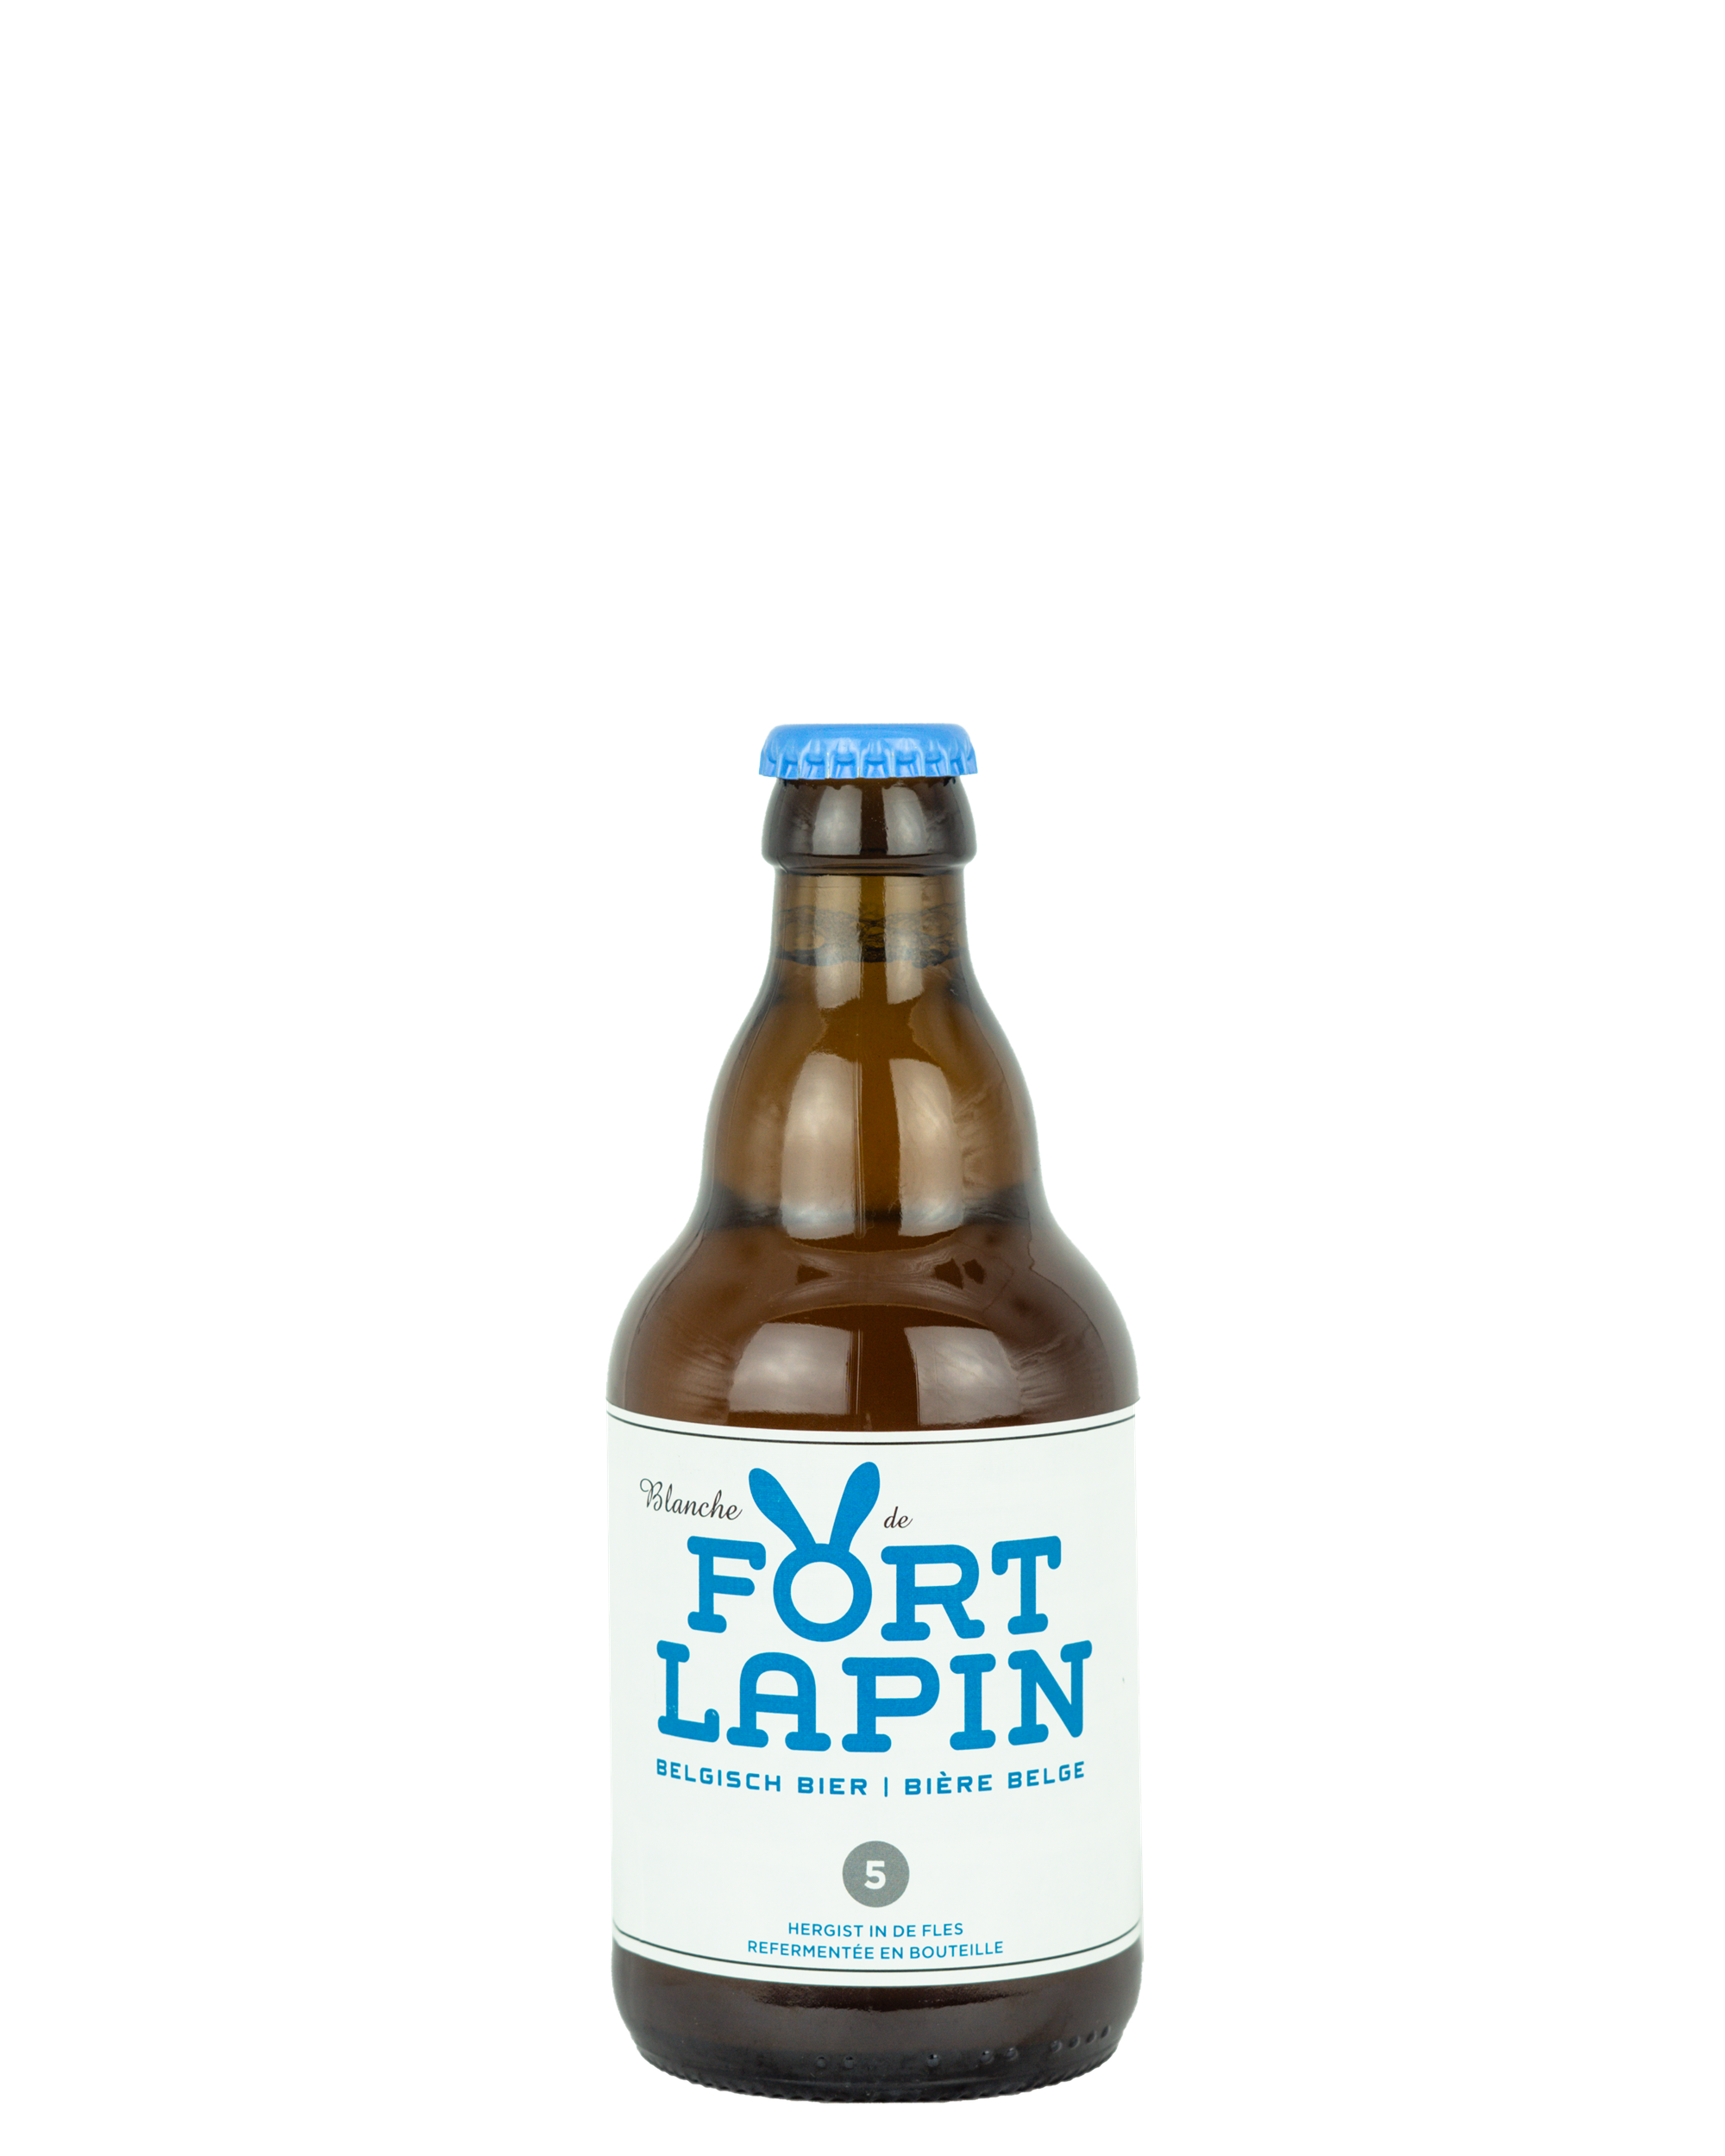 Fort Lapin 5 Blanche 33Cl